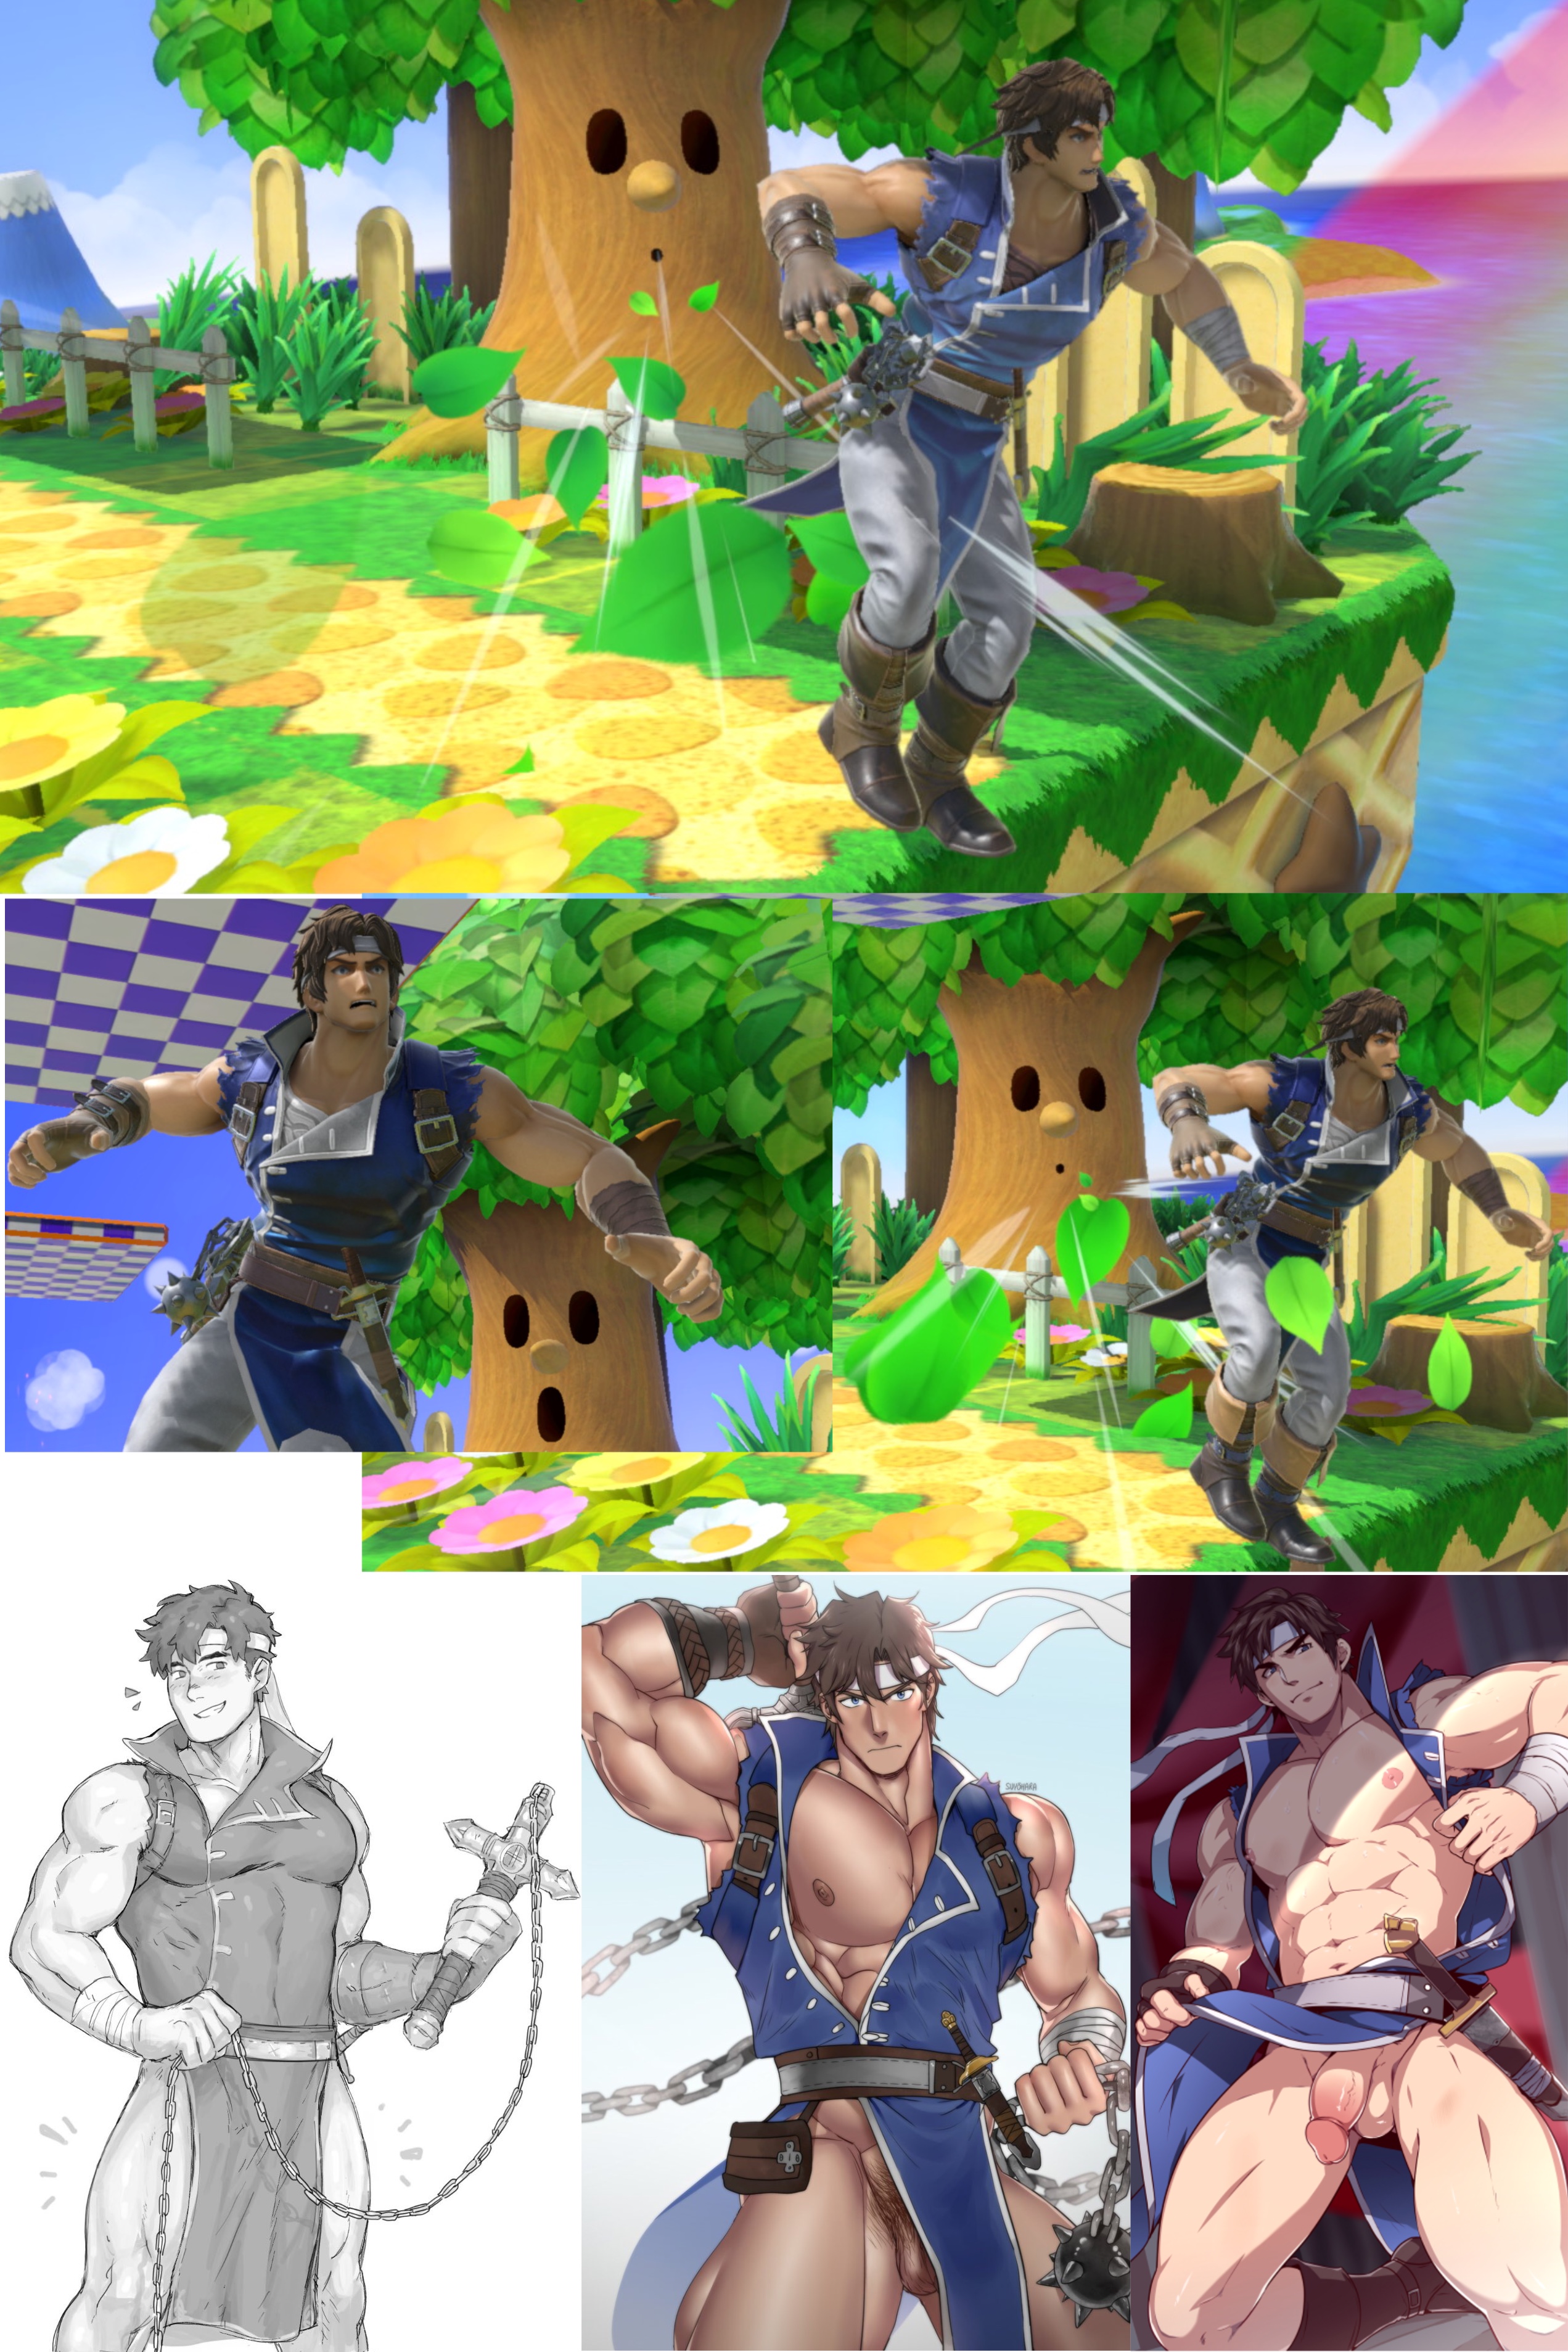 Richter Belmont getting exposed by Whispy Woods. 